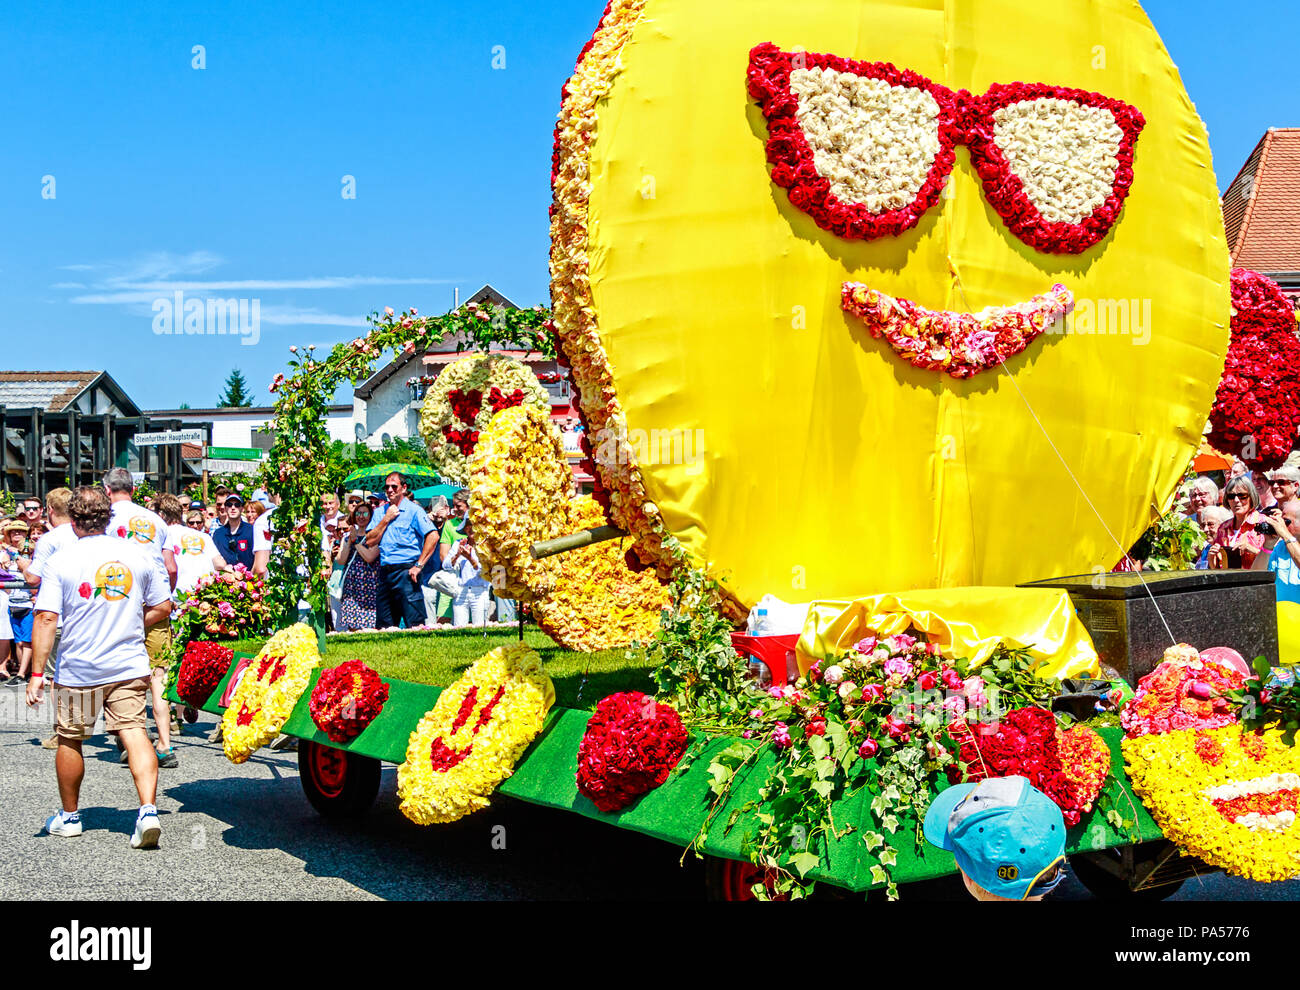 STEINFURTH, GERMANY-JULY 15, 2018 Enormous smiley on a parade carriage. Germany's 'Rose Village' Steinfurth celebrates 150 years of rose cultivation. Stock Photo